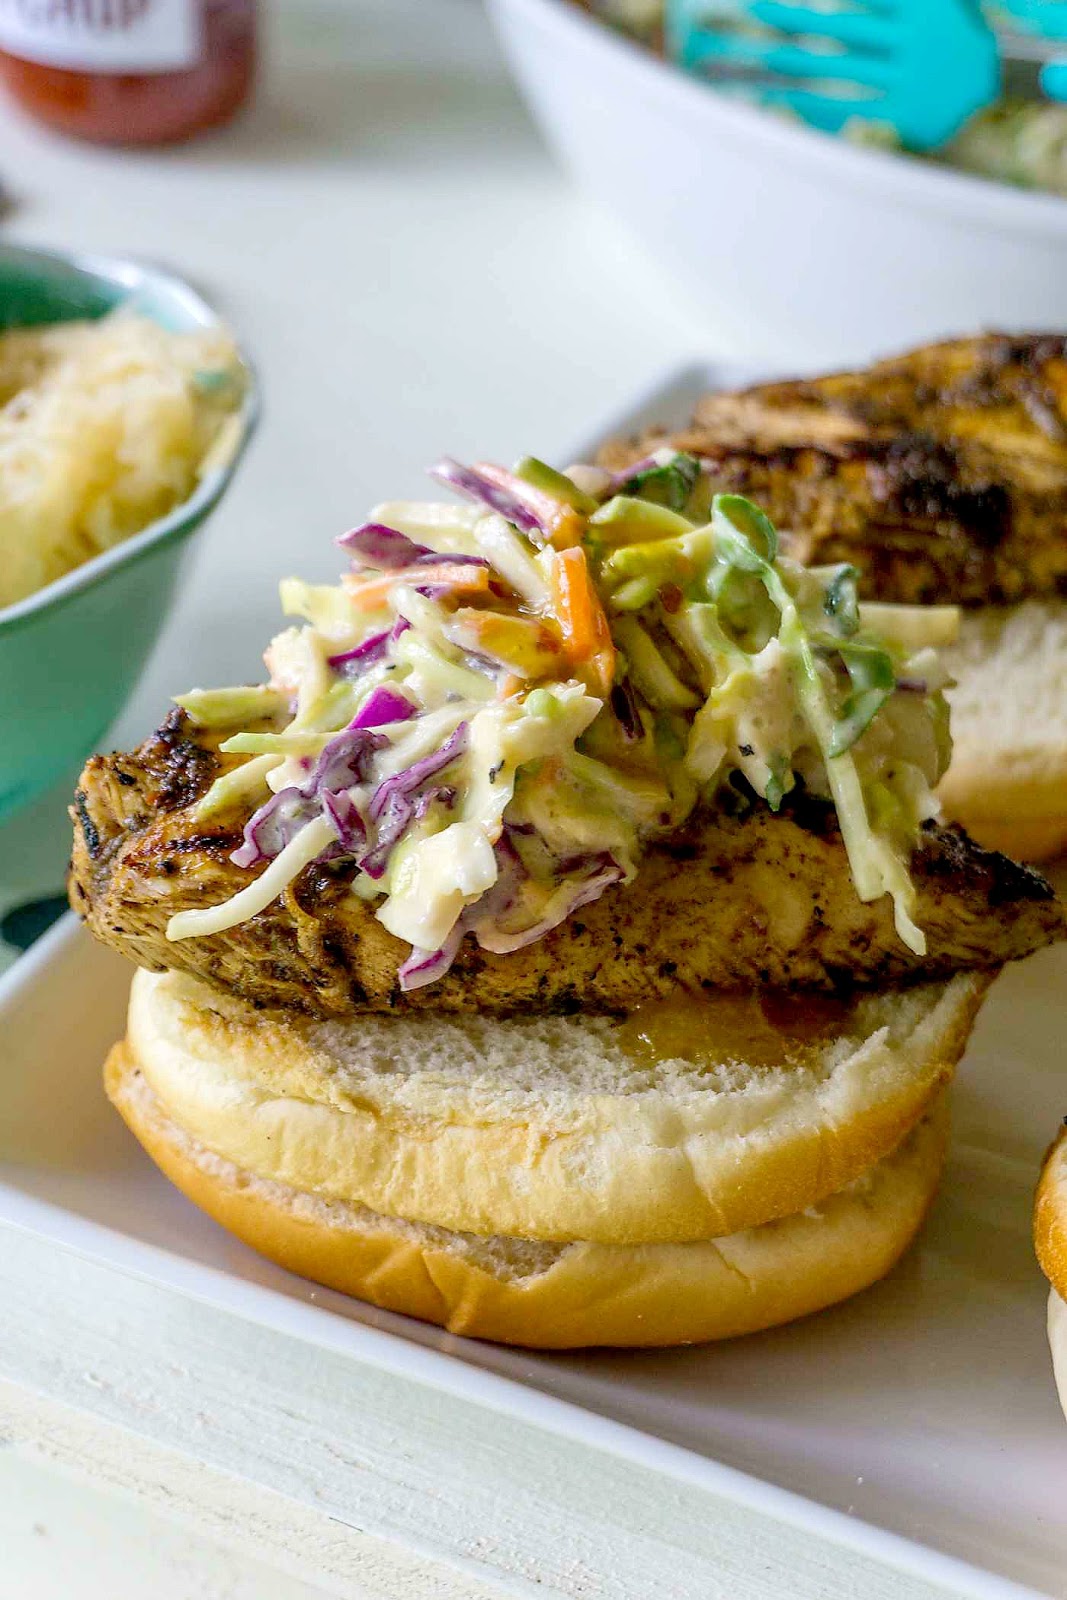 BBQ Heaven! Jerk Chicken Sandwiches with Mango Chipotle Coleslaw! Spicy grilled chicken breasts are topped with a crisp sweet and spicy coleslaw!